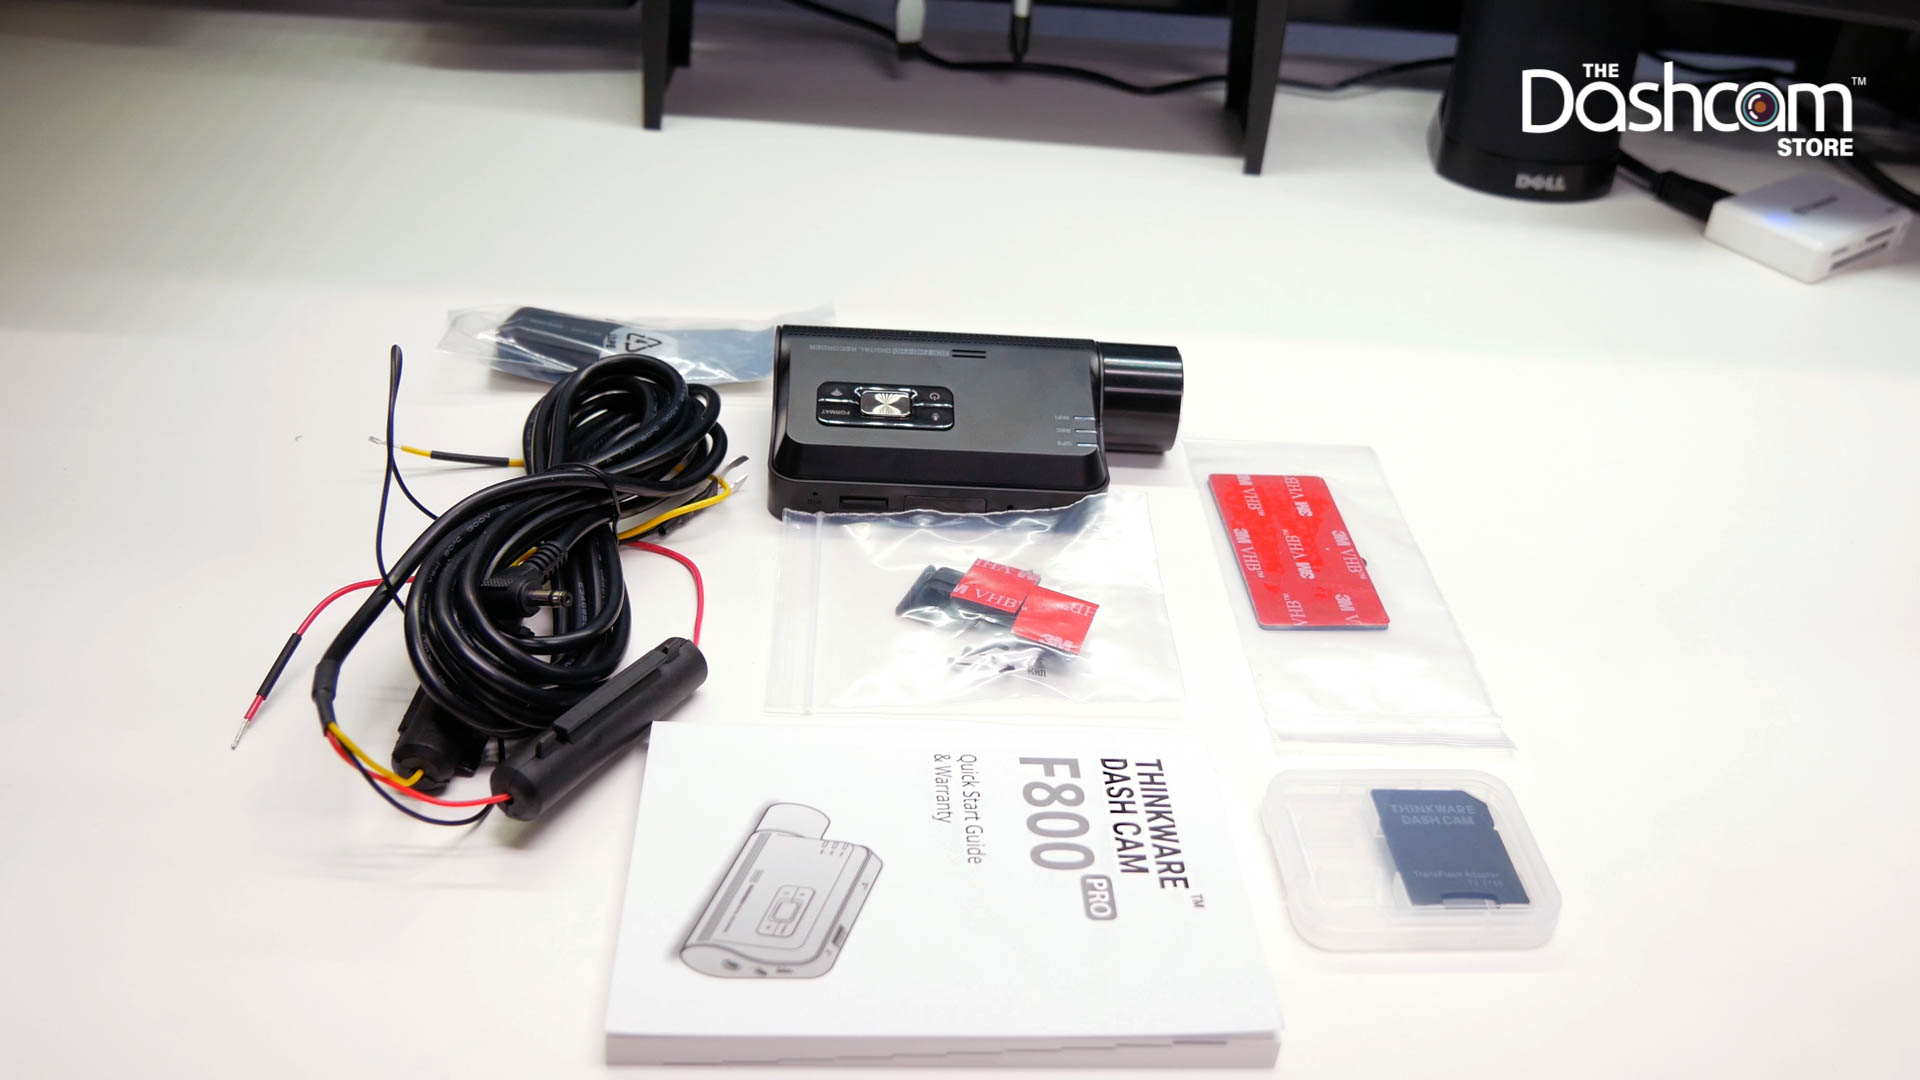 How To Hardwire a Thinkware Dashcam